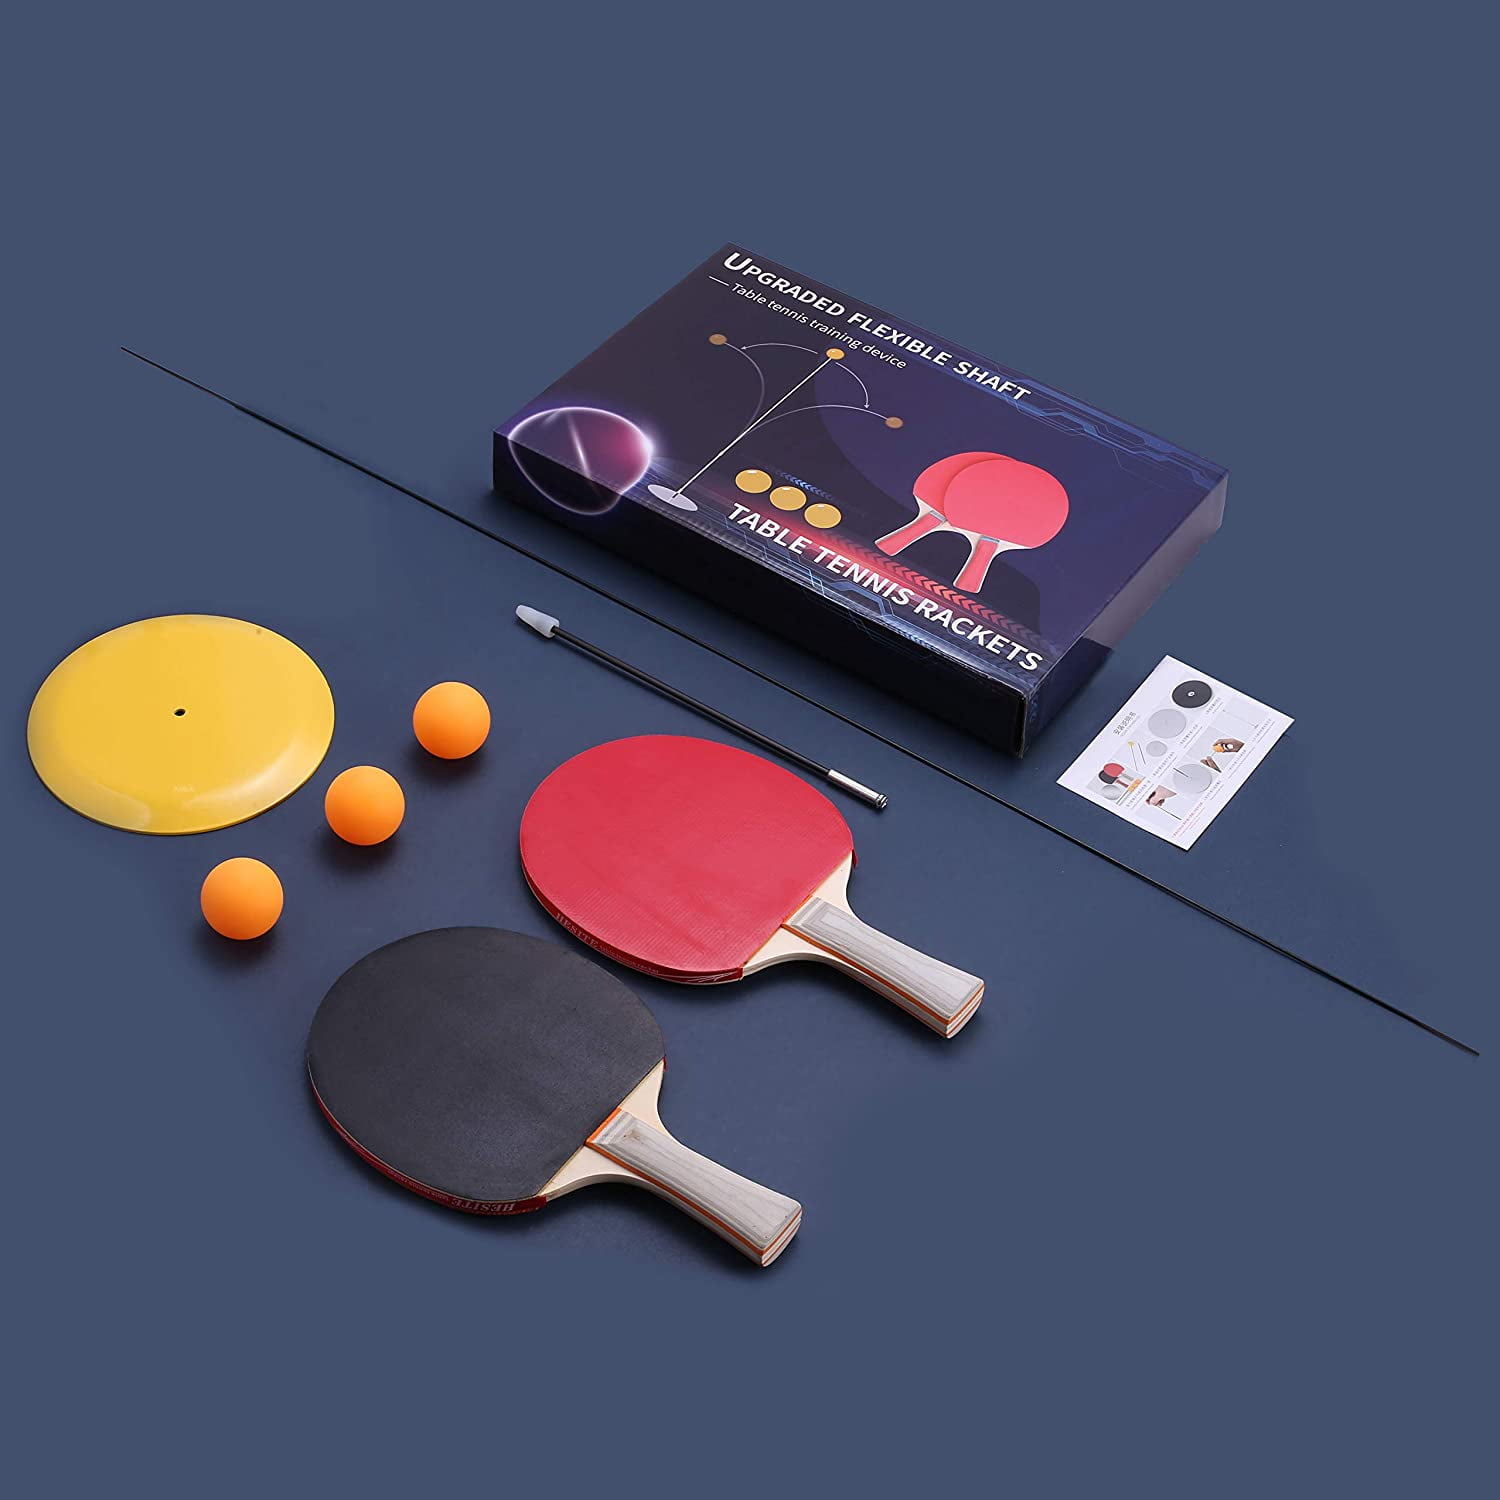 VORCOOL Table Tennis Trainer Elastic Shaft 1 Base+ 2rackets+ 3Balls Portable Table Tennis with Elastic Soft Shaft Leisure Decompression Sports for Adults and Kids Indoor Outdoor Play 